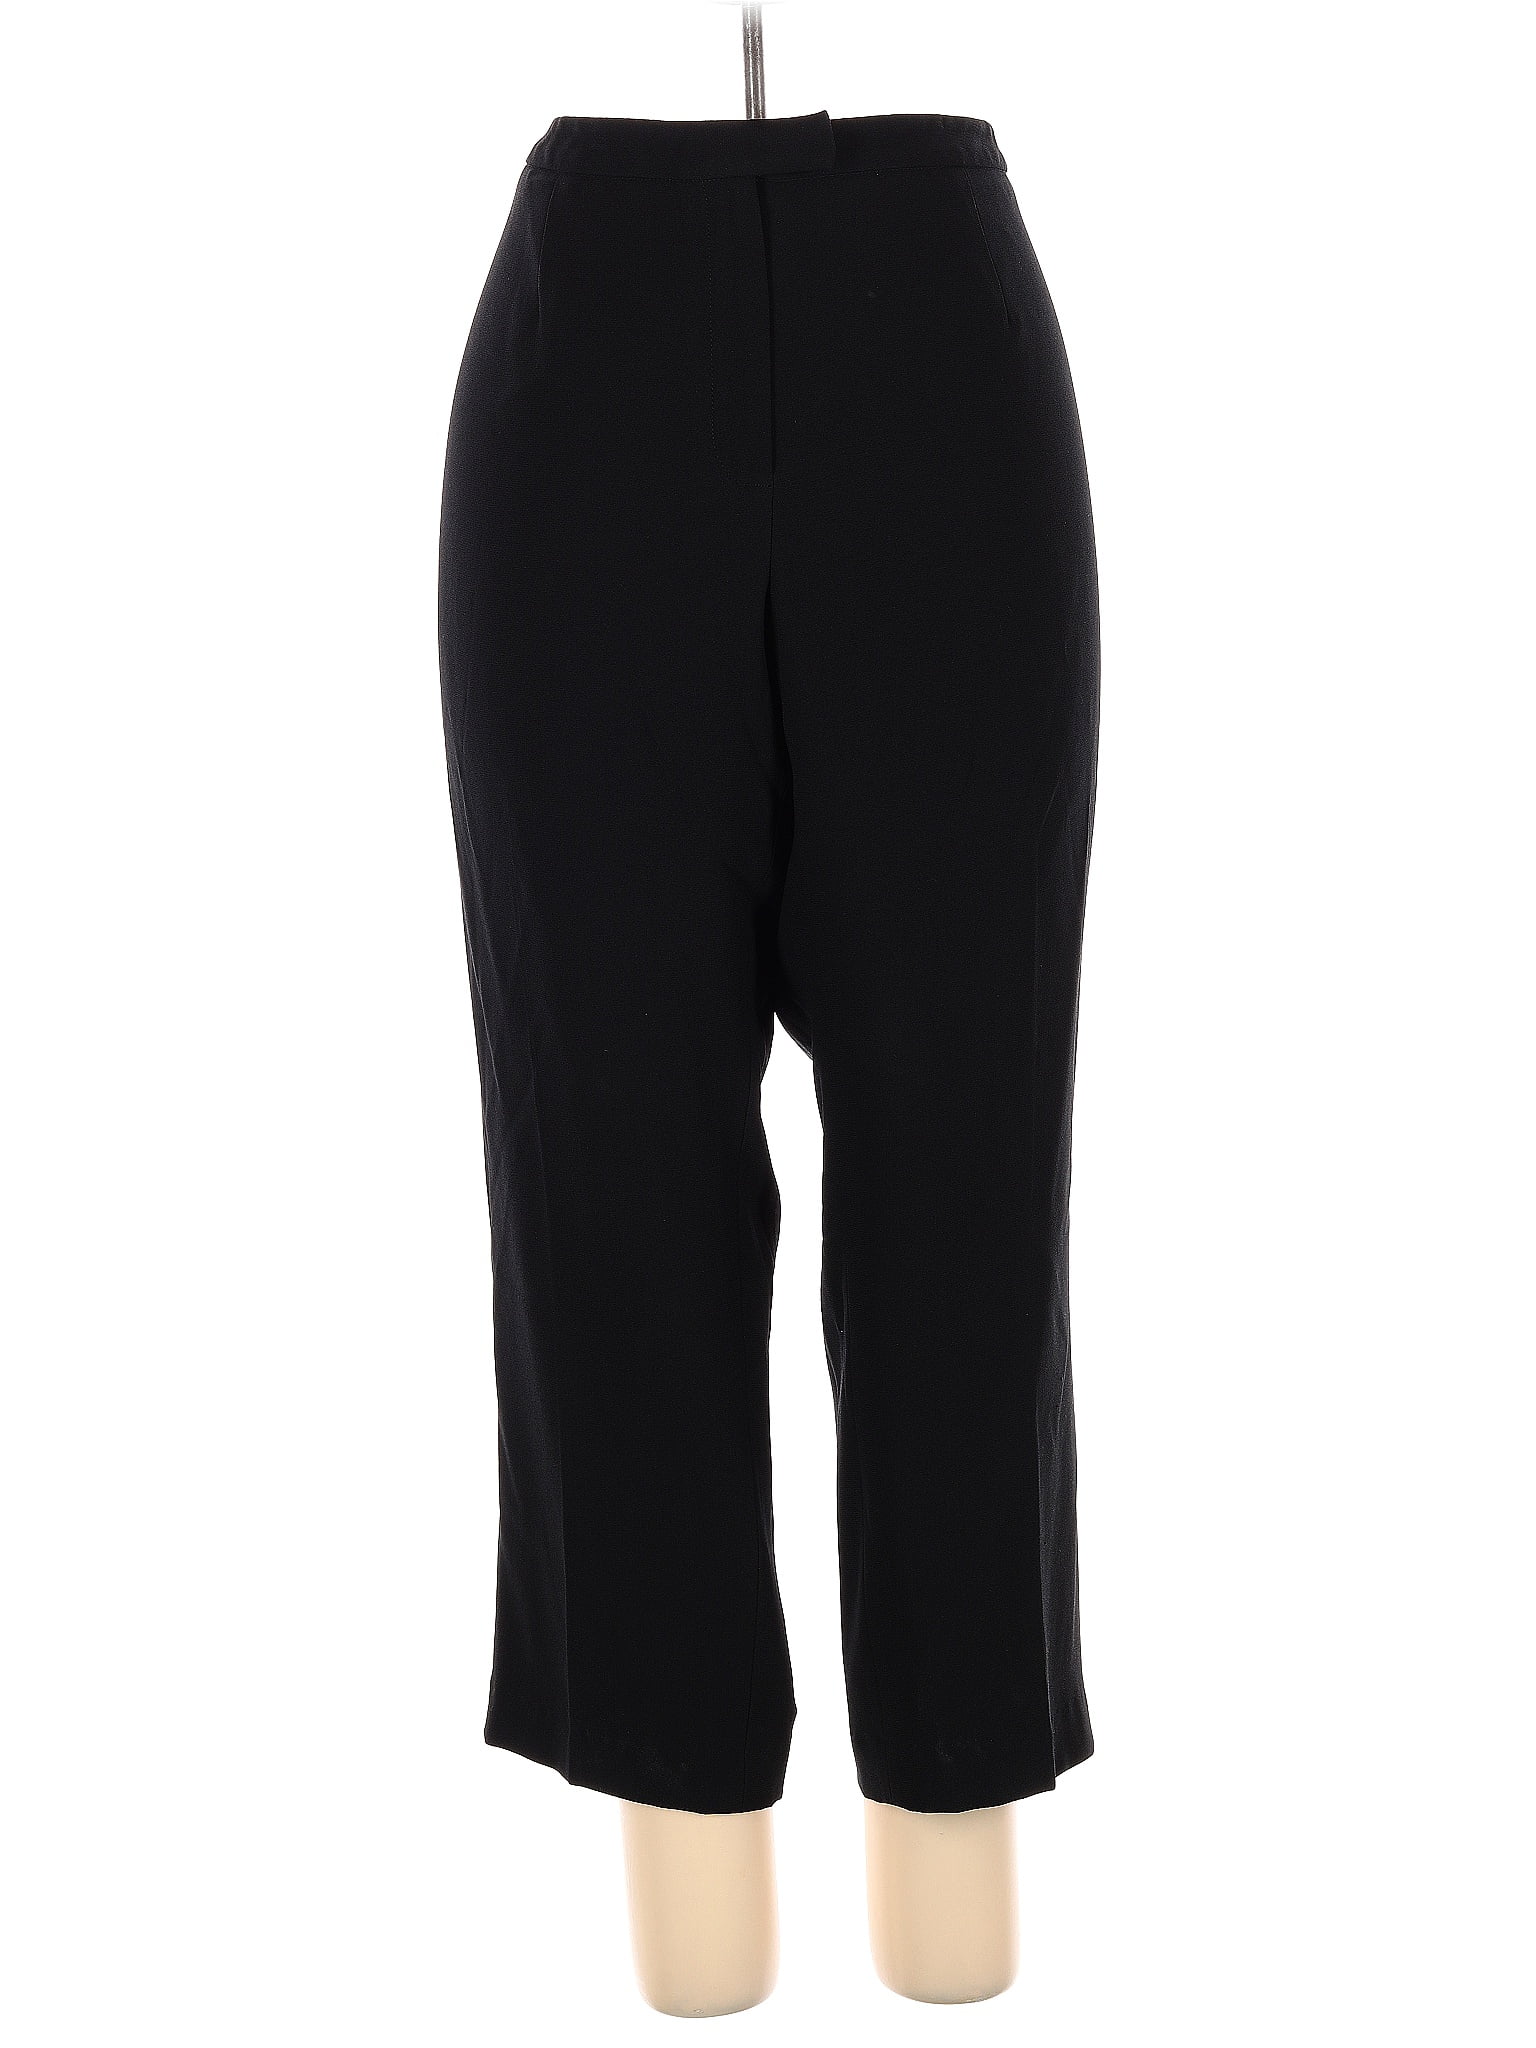 Peter Nygard Women's Pants On Sale Up To 90% Off Retail